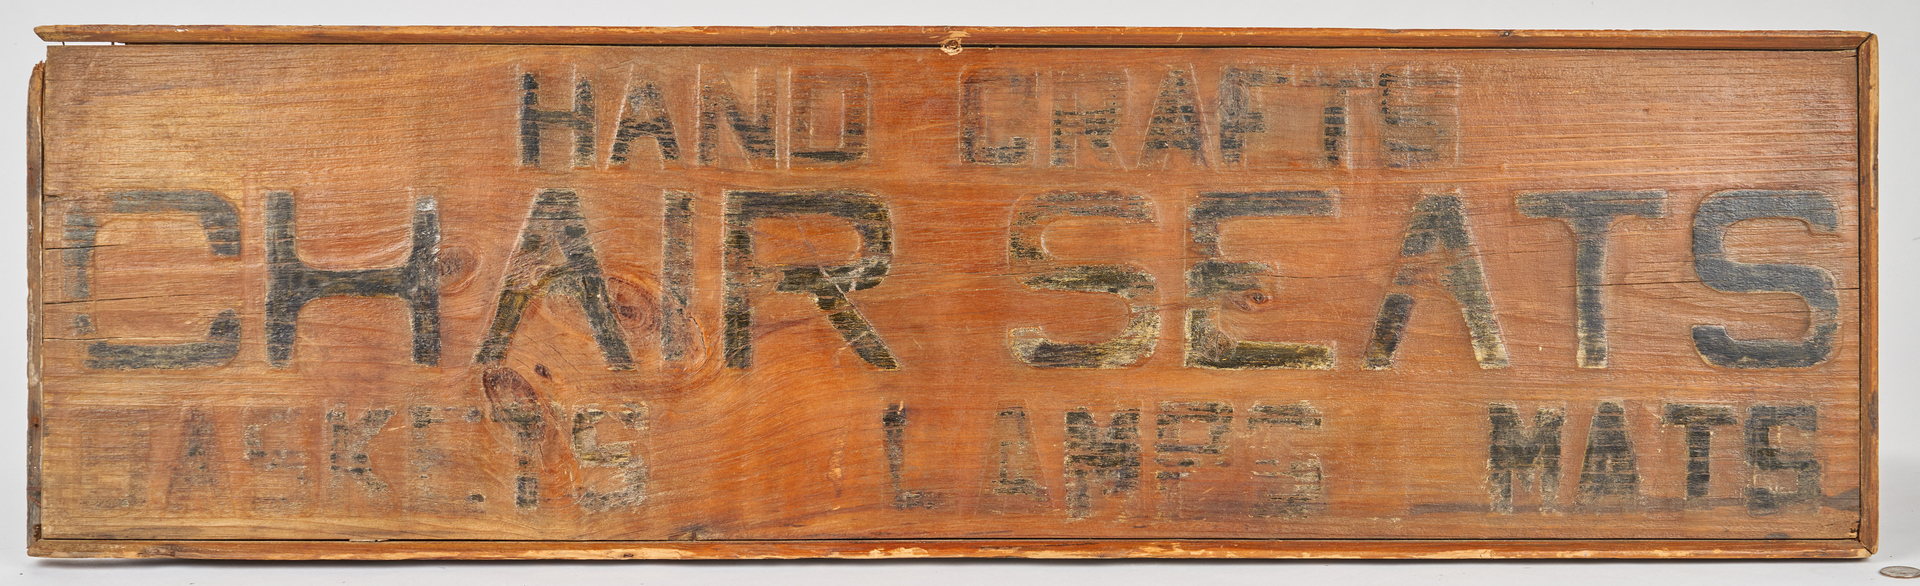 Lot 383: Painted & Stenciled "Hand Crafts" Advertising Sign